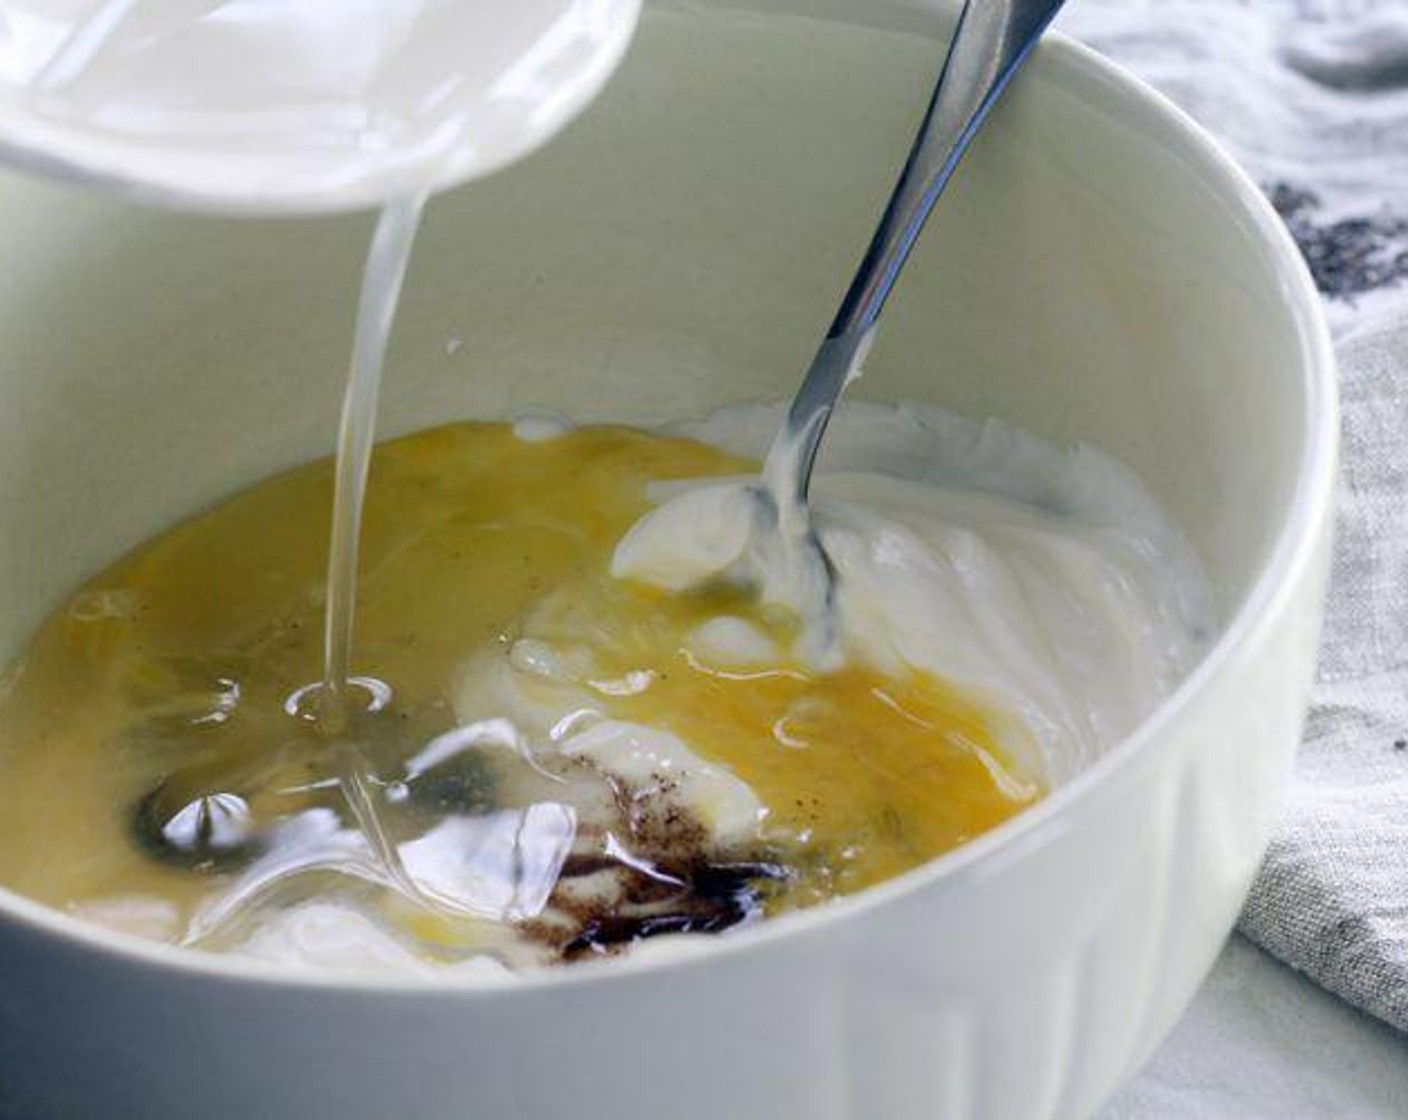 step 4 In a medium-sized bowl, whisk the Sour Cream (1 cup), Farmhouse Eggs® Large Brown Egg (1), 1 Tbsp Lemon Juice, Vanilla Bean Paste (1/2 Tbsp), and melted lard until creamy.